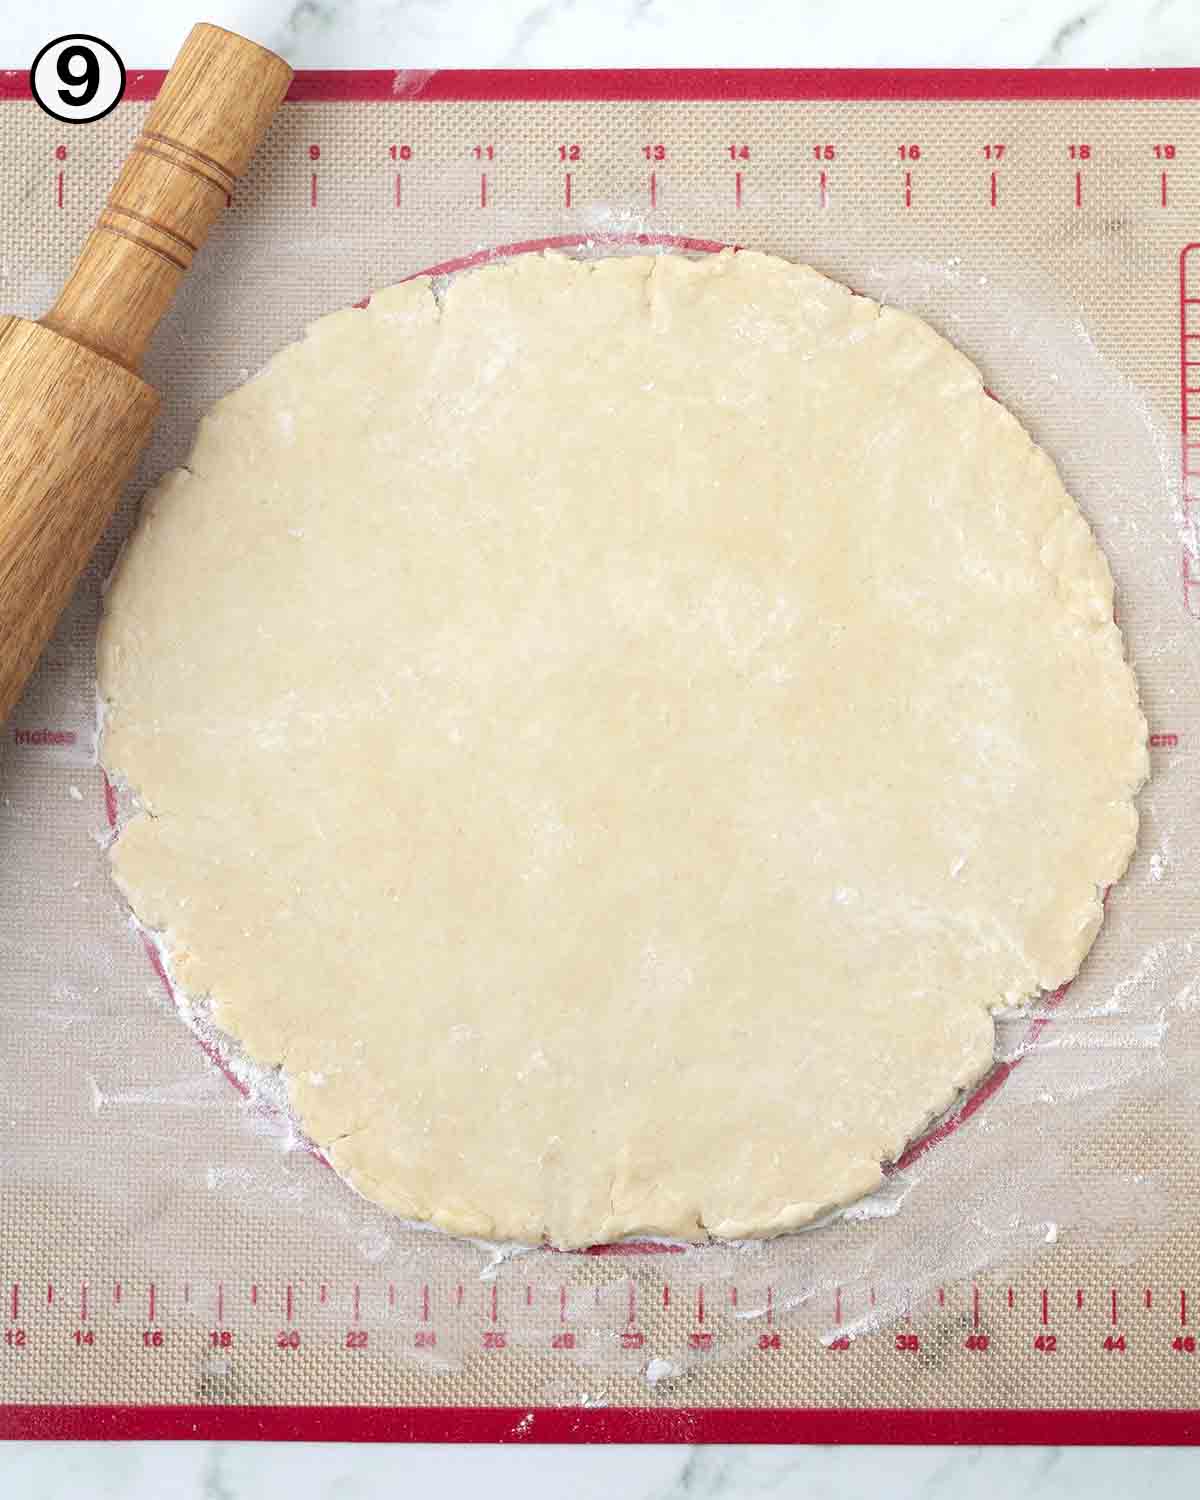 Vegan pie dough rolled out on a pastry mat.